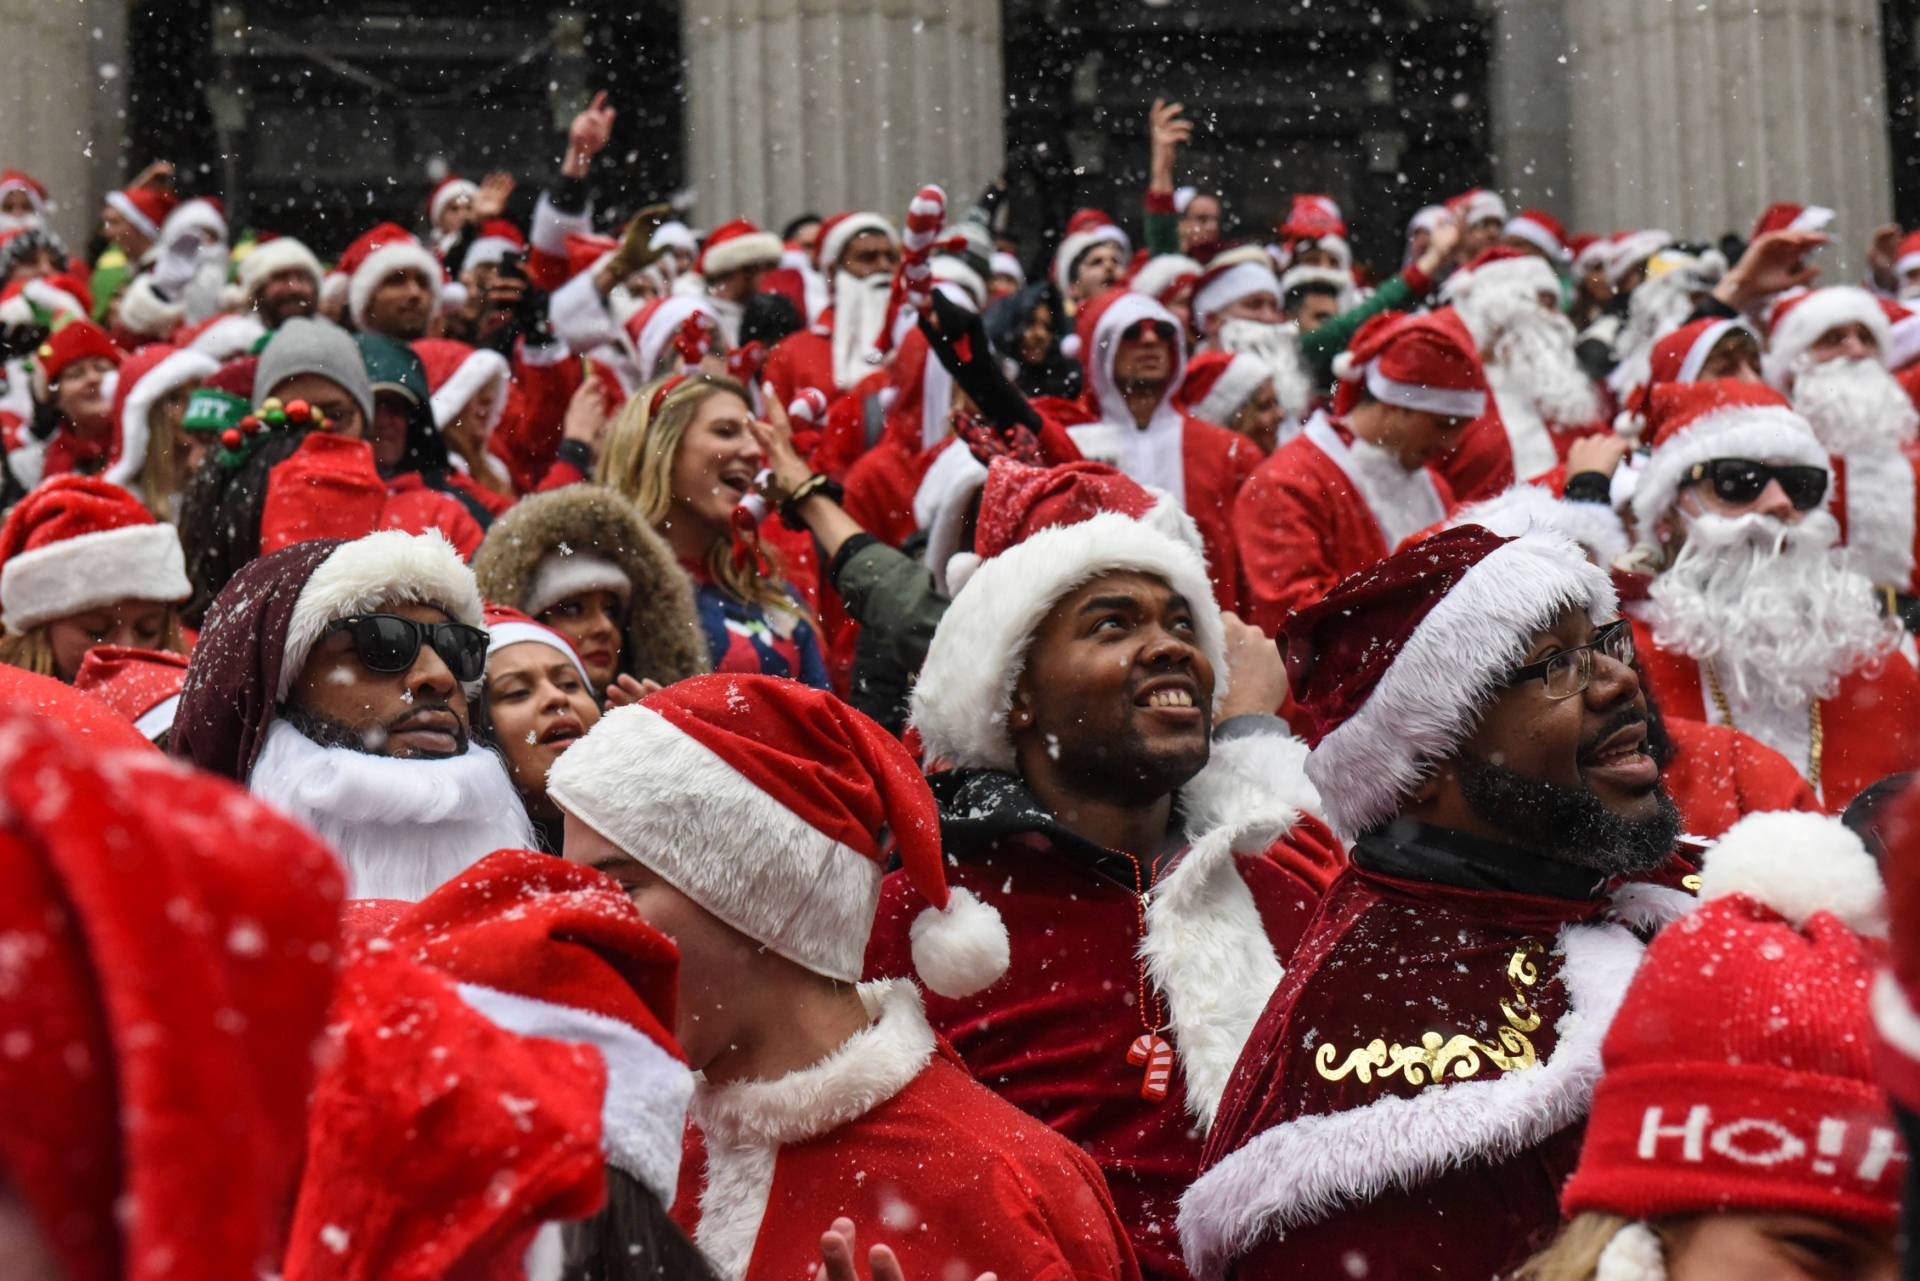 The annual bar crawl that is SantaCon is now celebrated in cities around the globe. But it got its start in San Francisco.  Stephanie Keith/Getty Images